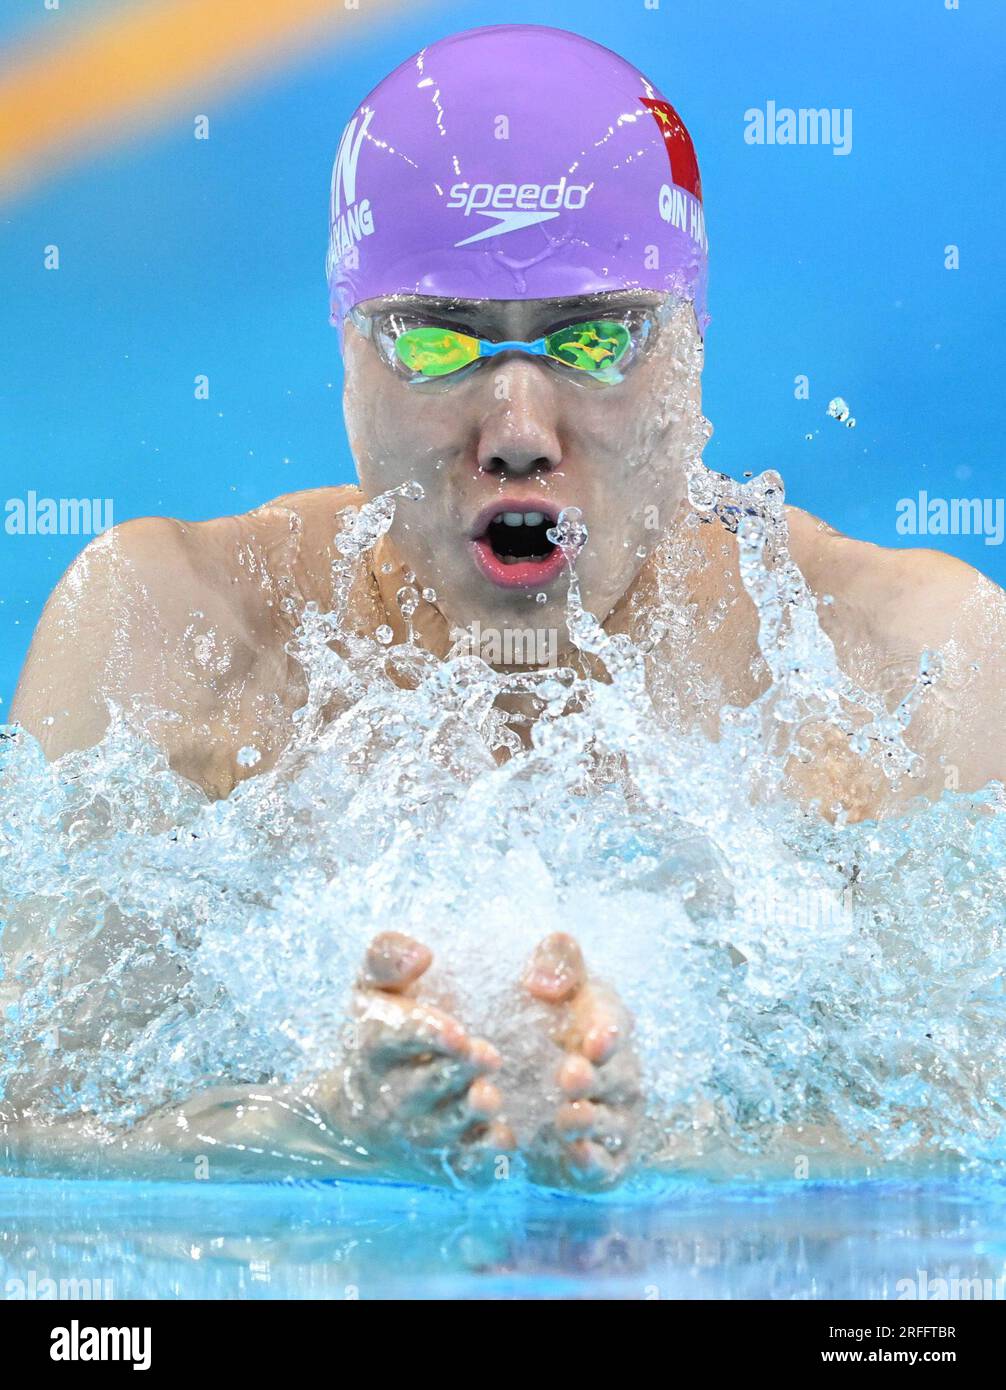 (230803) -- CHENGDU, Aug. 3, 2023 (Xinhua) - Qin Haiyang of China competes during the Men's 200m Breaststroke Semifinal of swimming at the 31st FISU Summer World University Games in Chengdu, southwest China's Sichuan Province, Aug. 3, 2023. (Xinhua/Chen Zeguo) Stock Photo